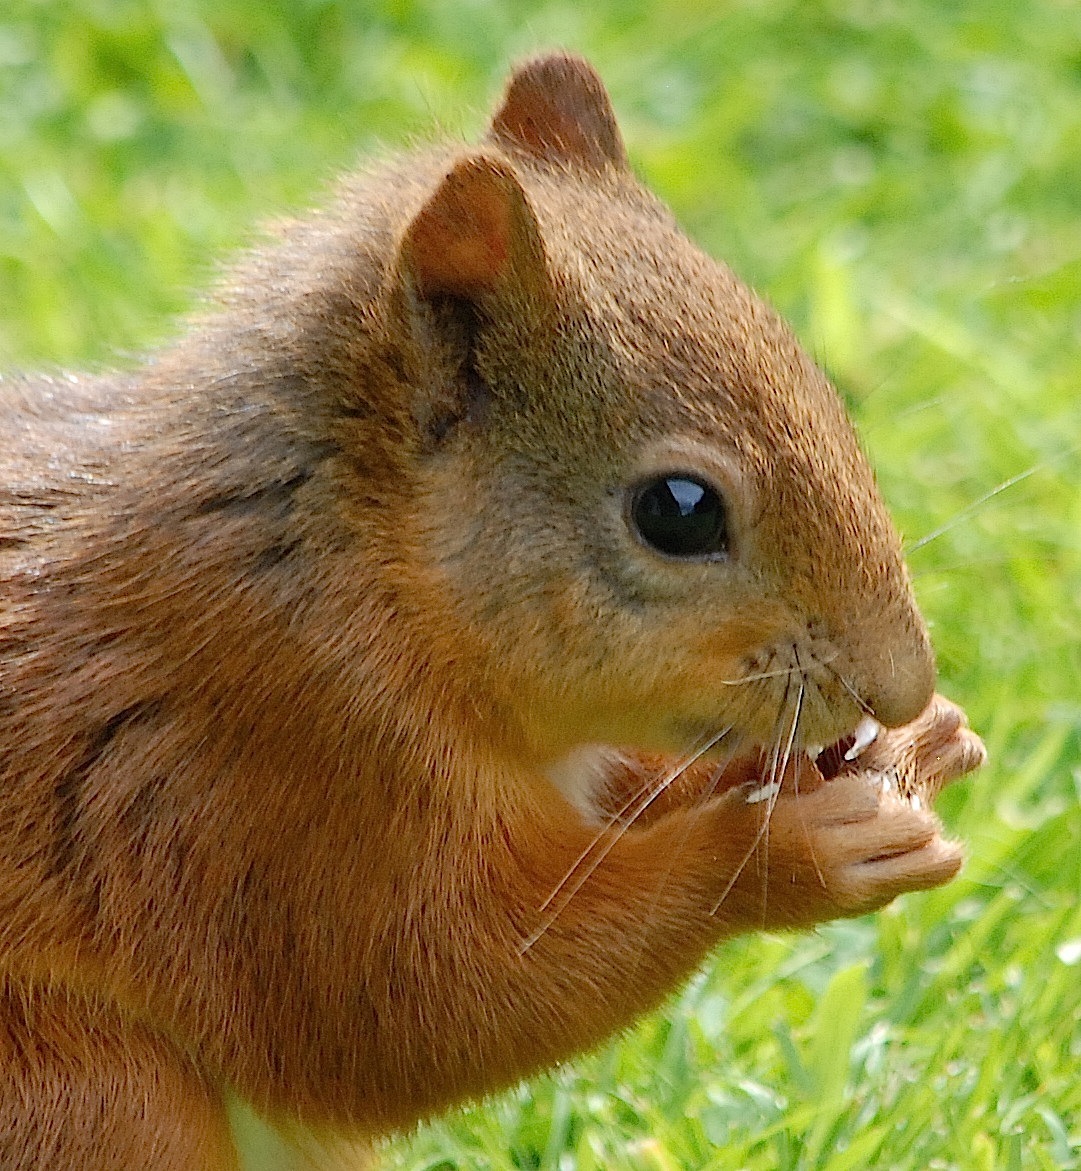 Nature Cameos: Tranquility and Red Squirrels